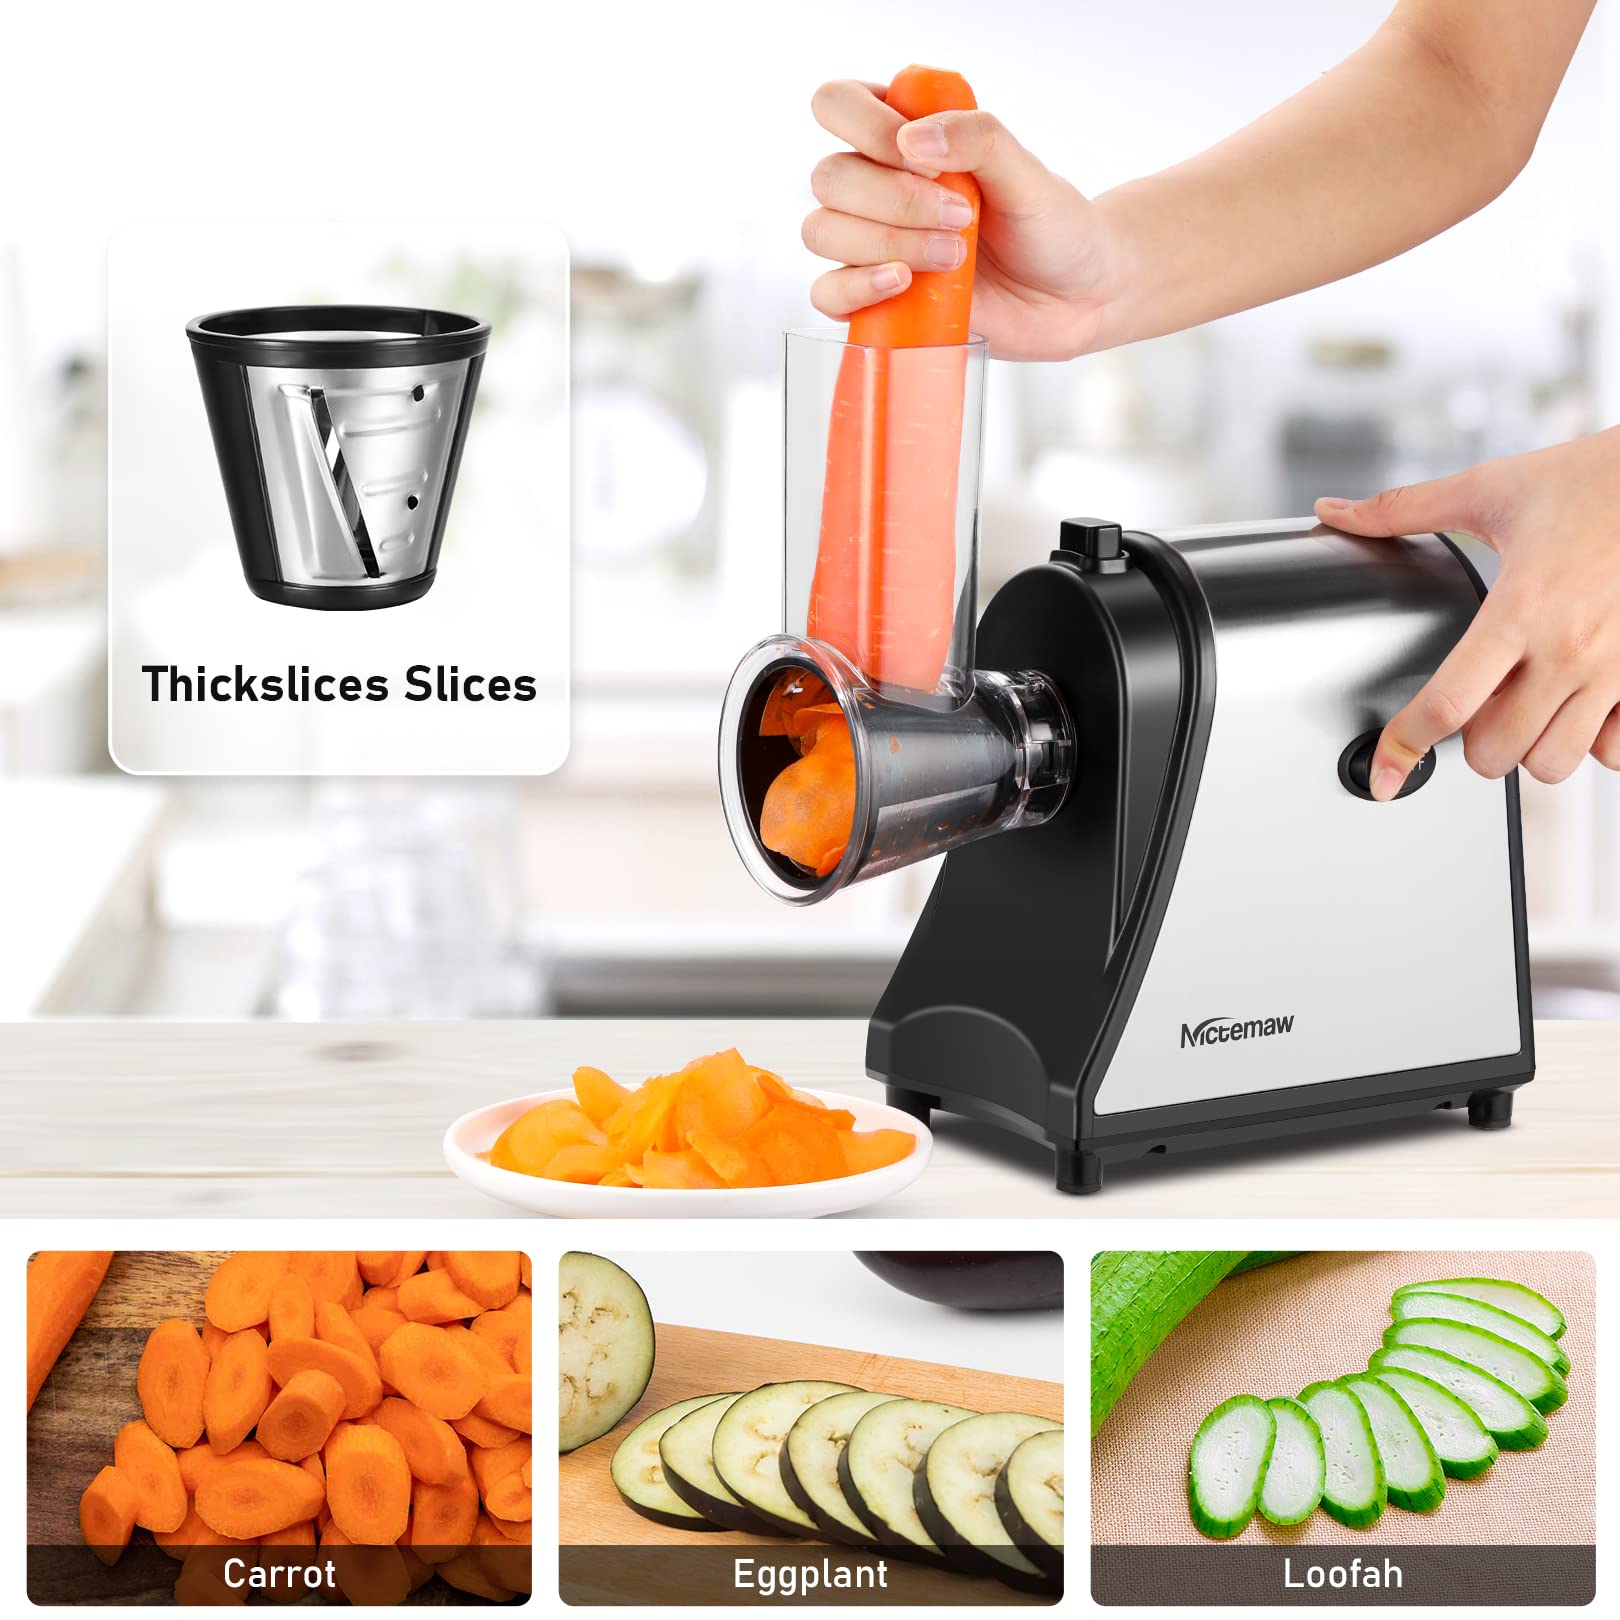 Electric Cheese Grater, 250W Multifunctional Vegetable Cutter for Home Use, 5 Stainless Steel Rotary Blades and One-Touch Control, Electric Salad Maker Cheese Shredder for Cheeses, Fruit, Veggies